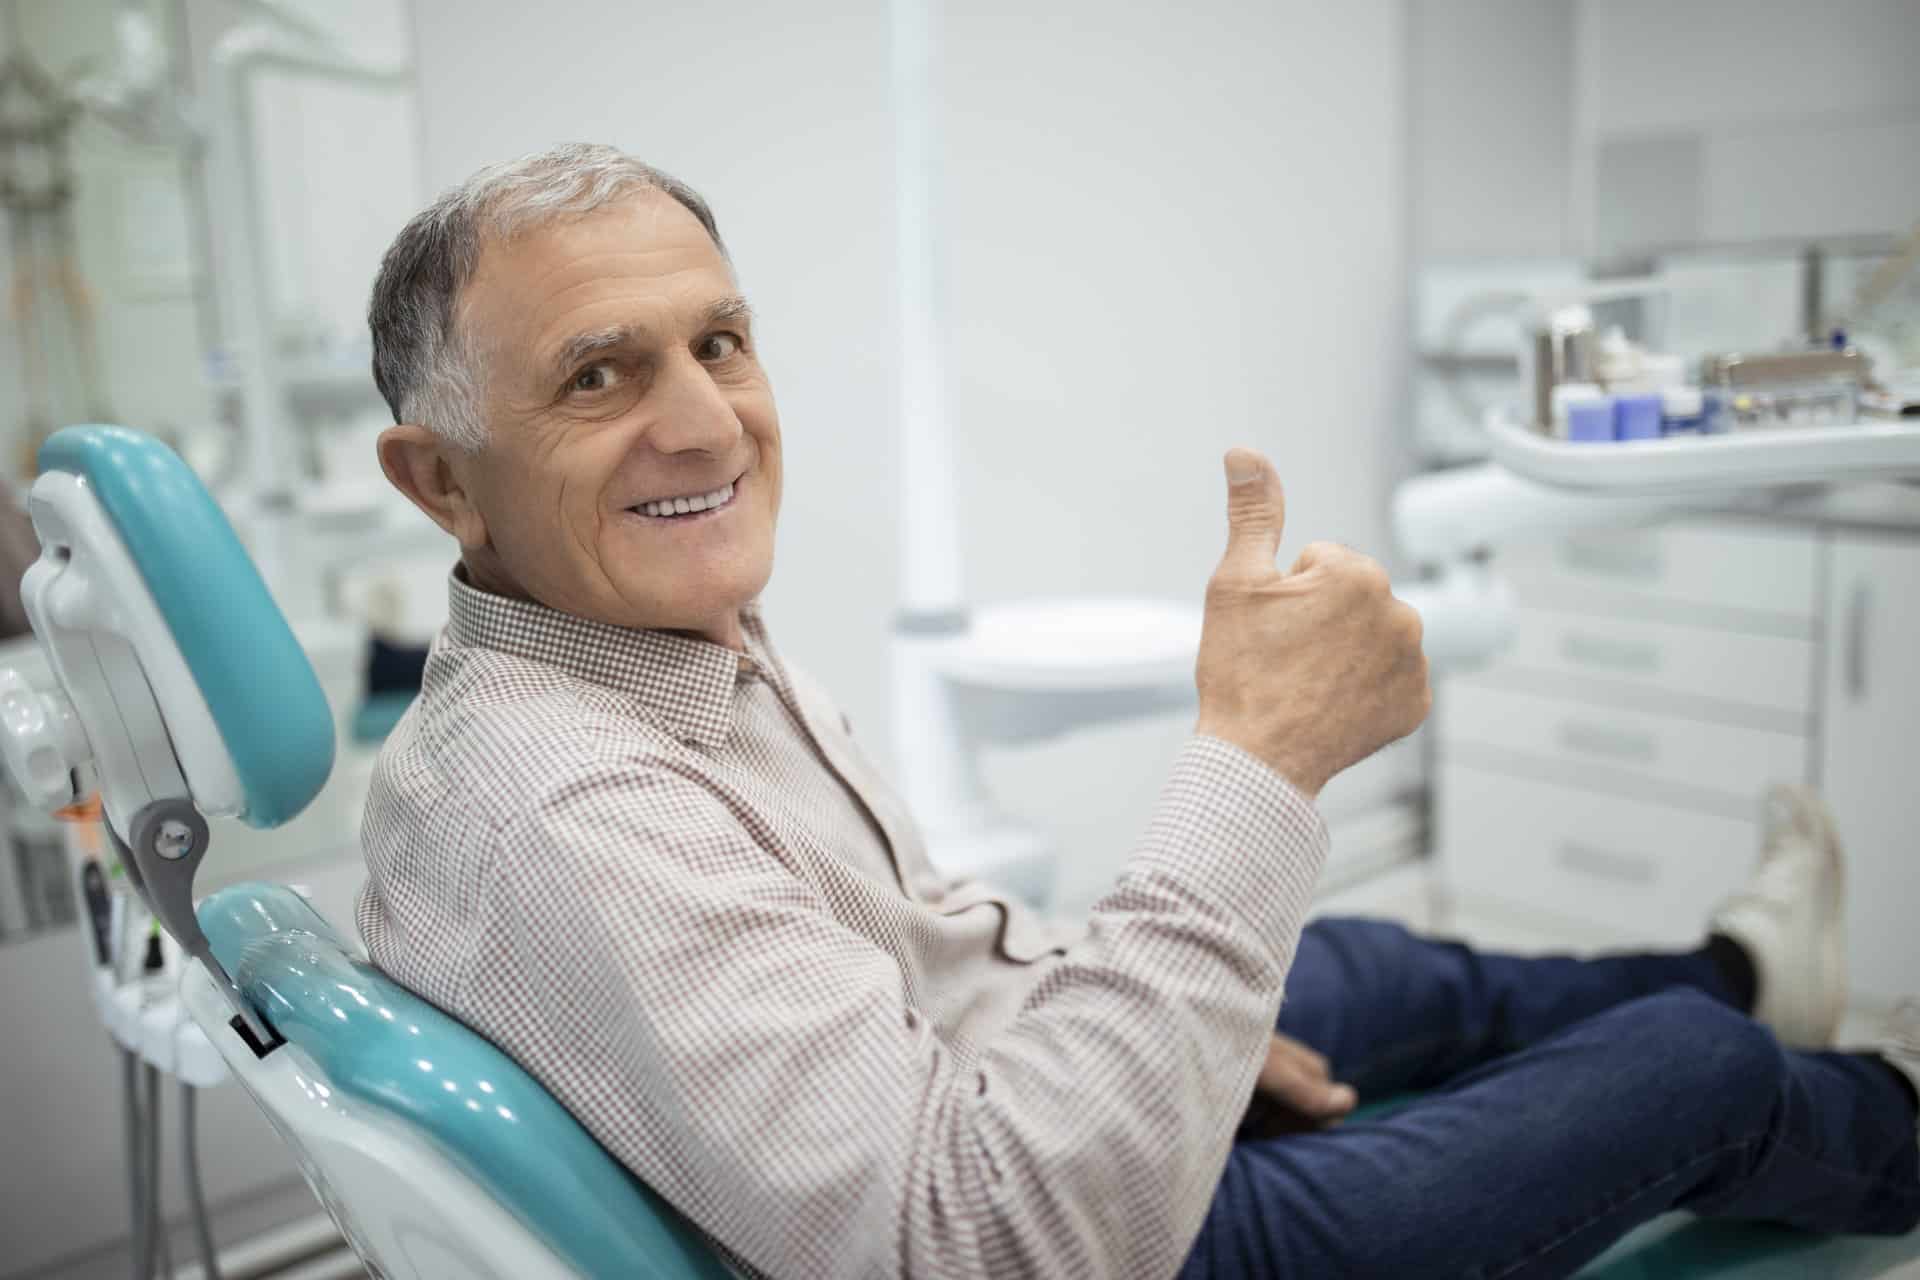 Our team can provide a full arch of dental implants to replace an entire arch of missing teeth, restoring your functional and aesthetic smile.